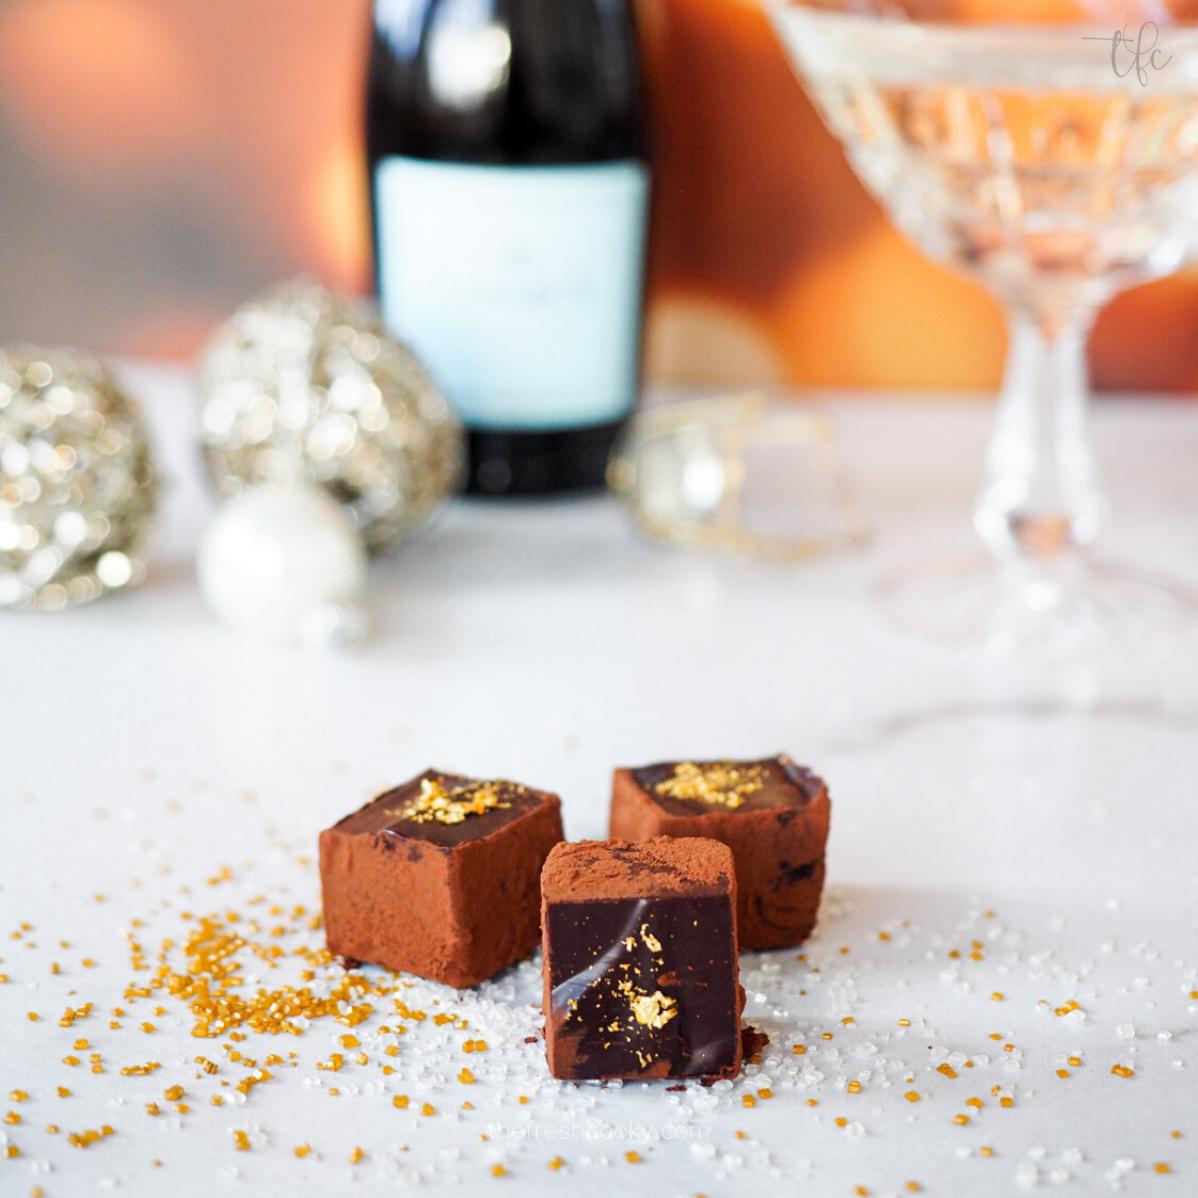  Satisfy your sweet tooth with our Champagne Truffle Squares – you won't regret it.